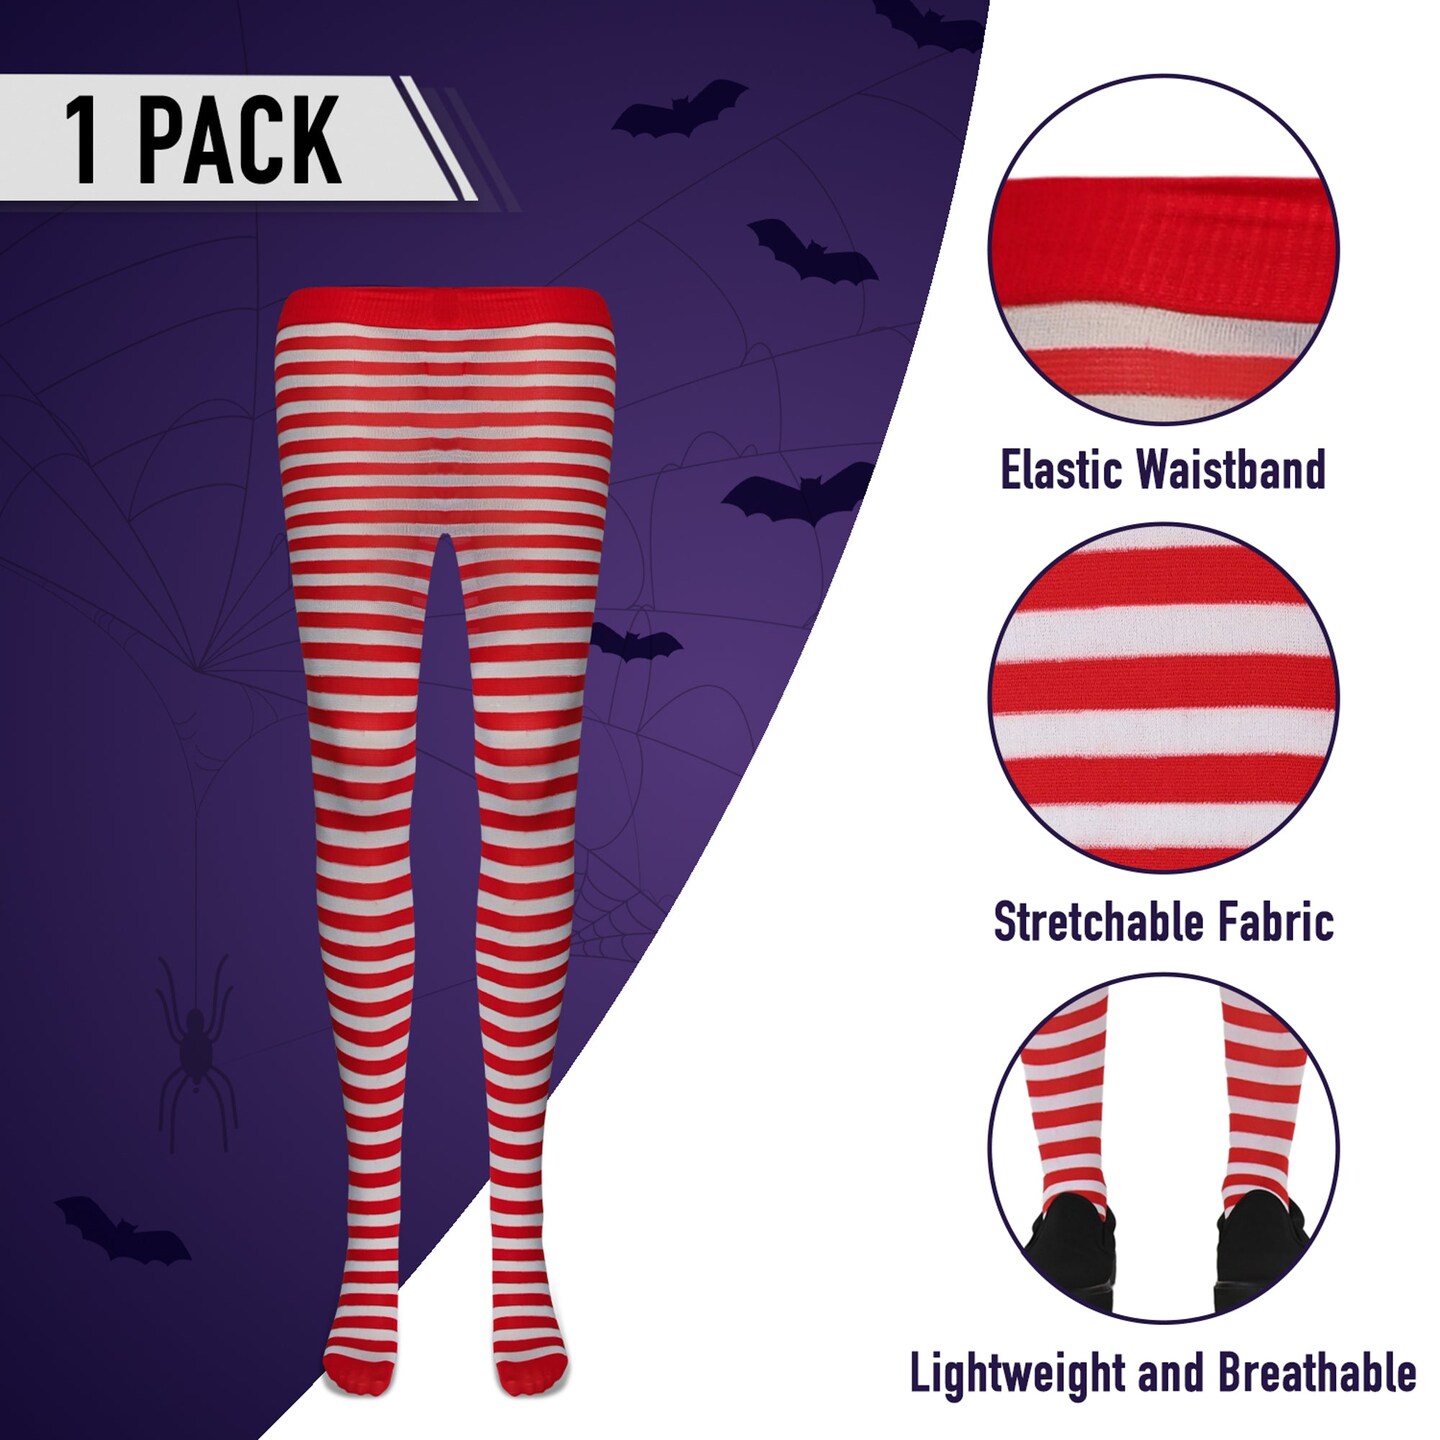 White and Red Tights - Striped Nylon Stretch Pantyhose Stocking